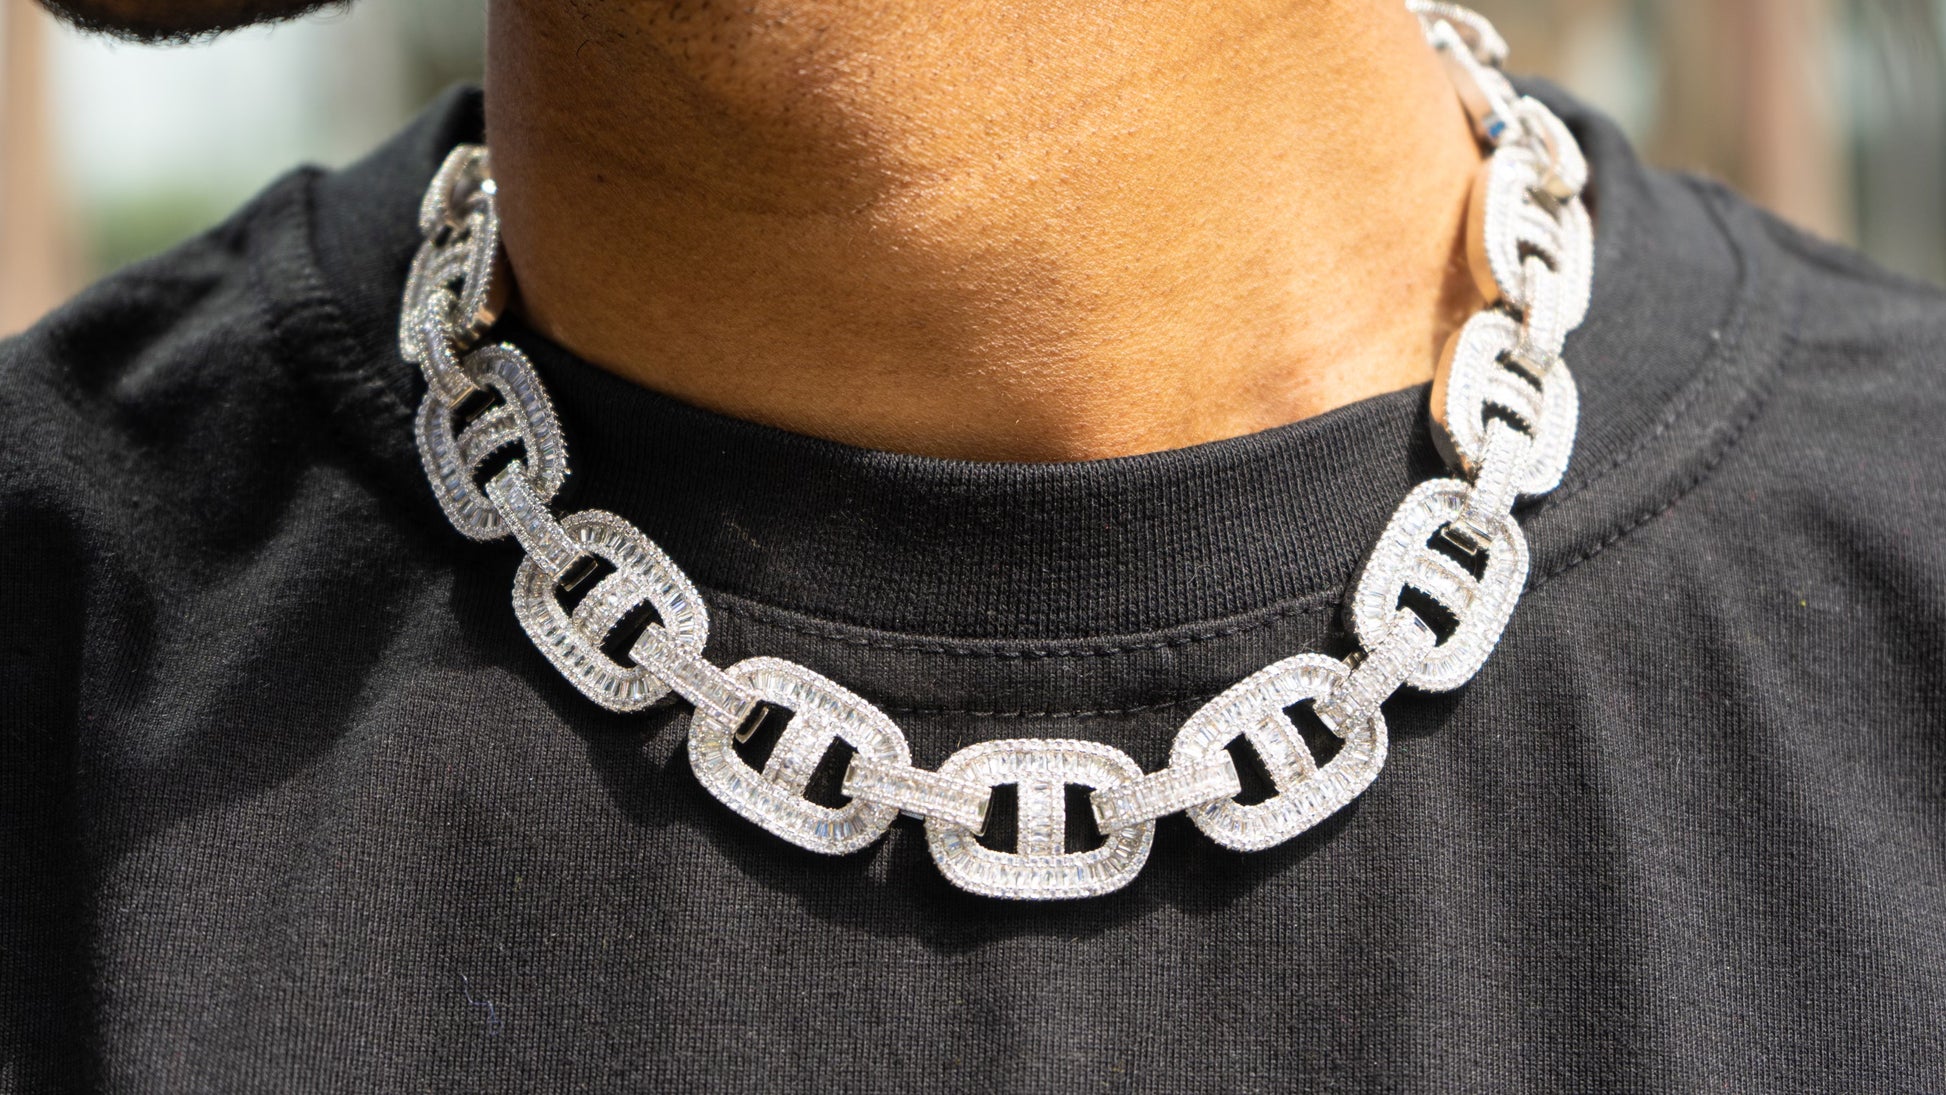 18mm Baguette Miami Cuban Prong Link Chain image wearing